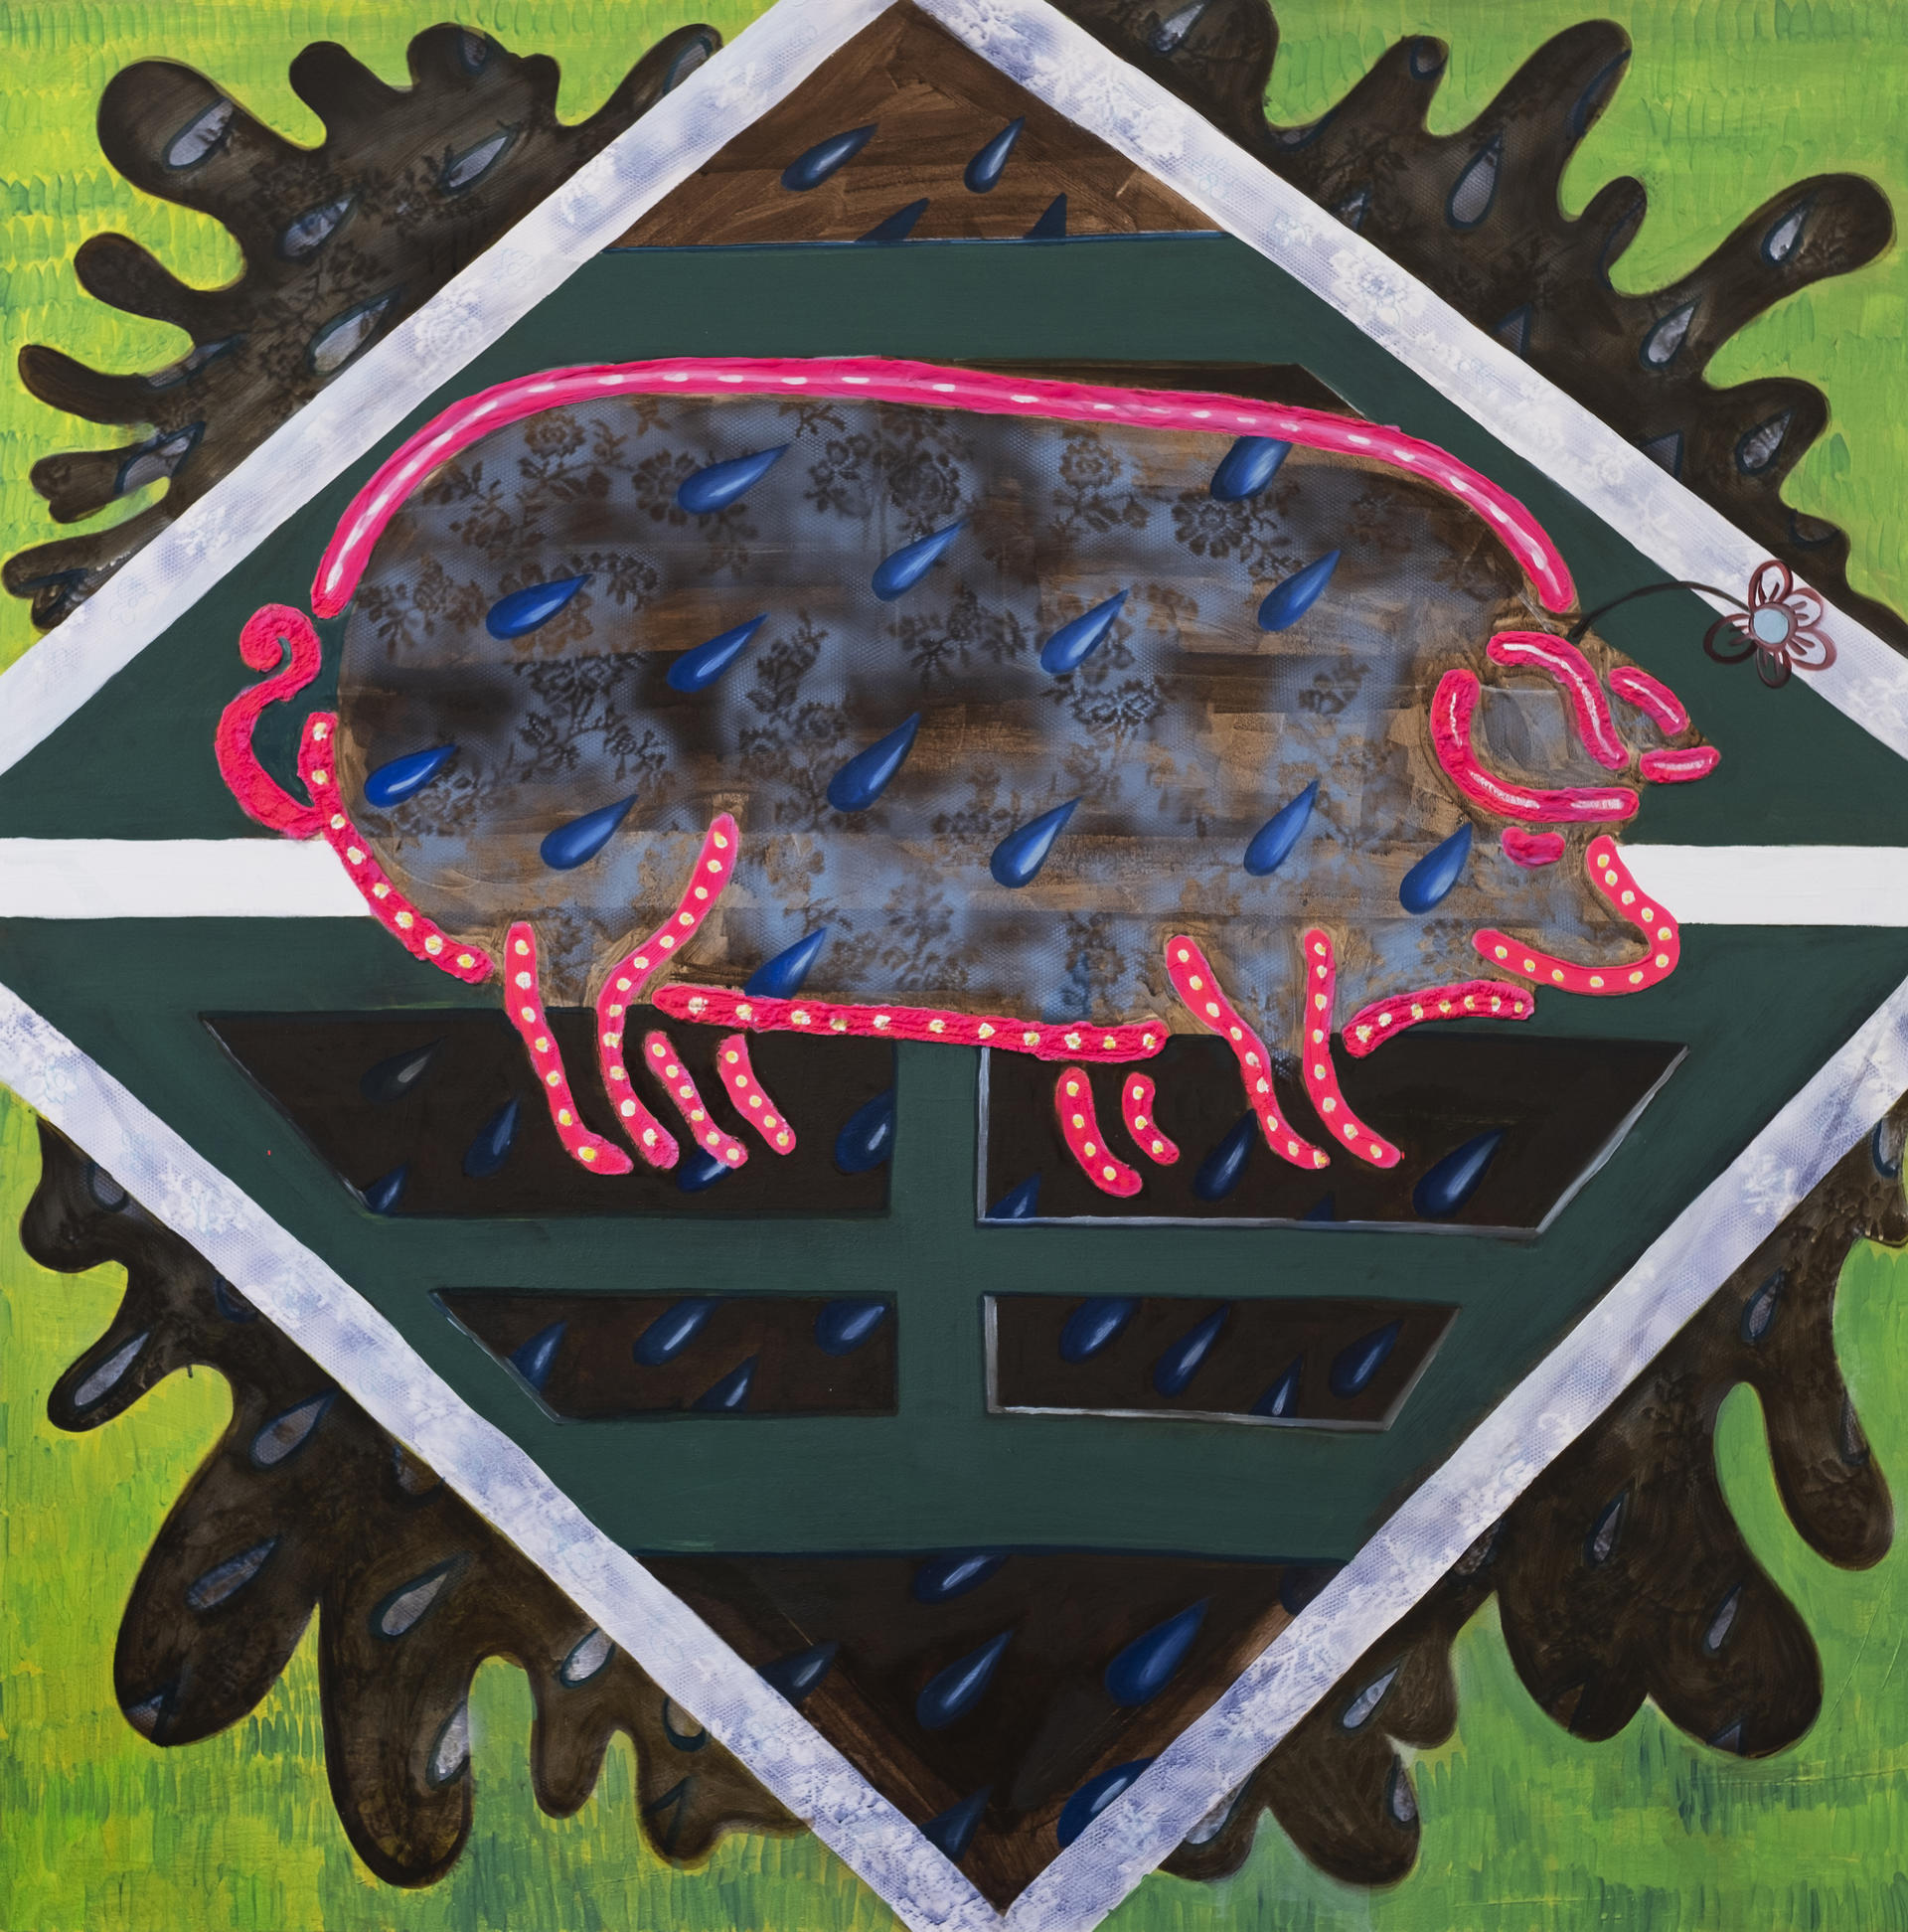 A neon pig walking aimlessly in soft warm mud on a prairie. The image is from a butcher’s sign outside of a local restaurant.